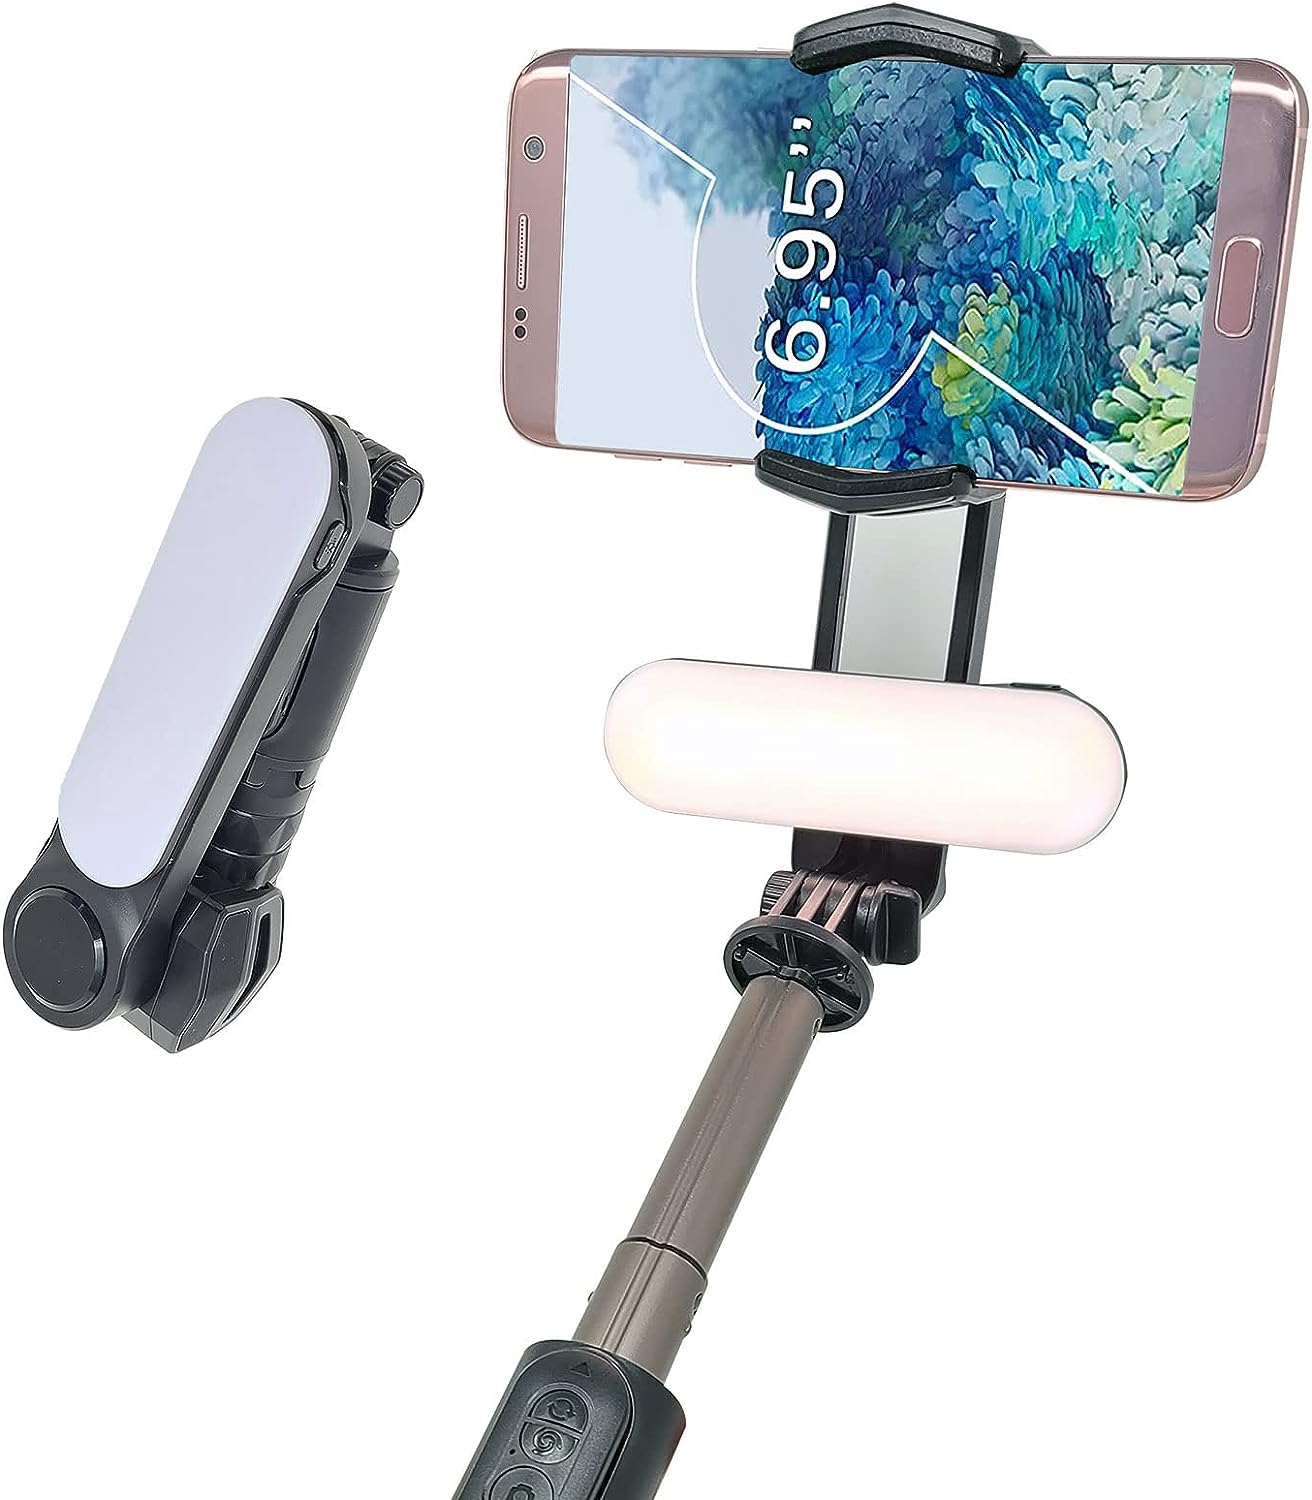  unused unopened Gin bar self .. stick wireless remote control attaching smartphone Q09 single axis tripod folding type super light weight 